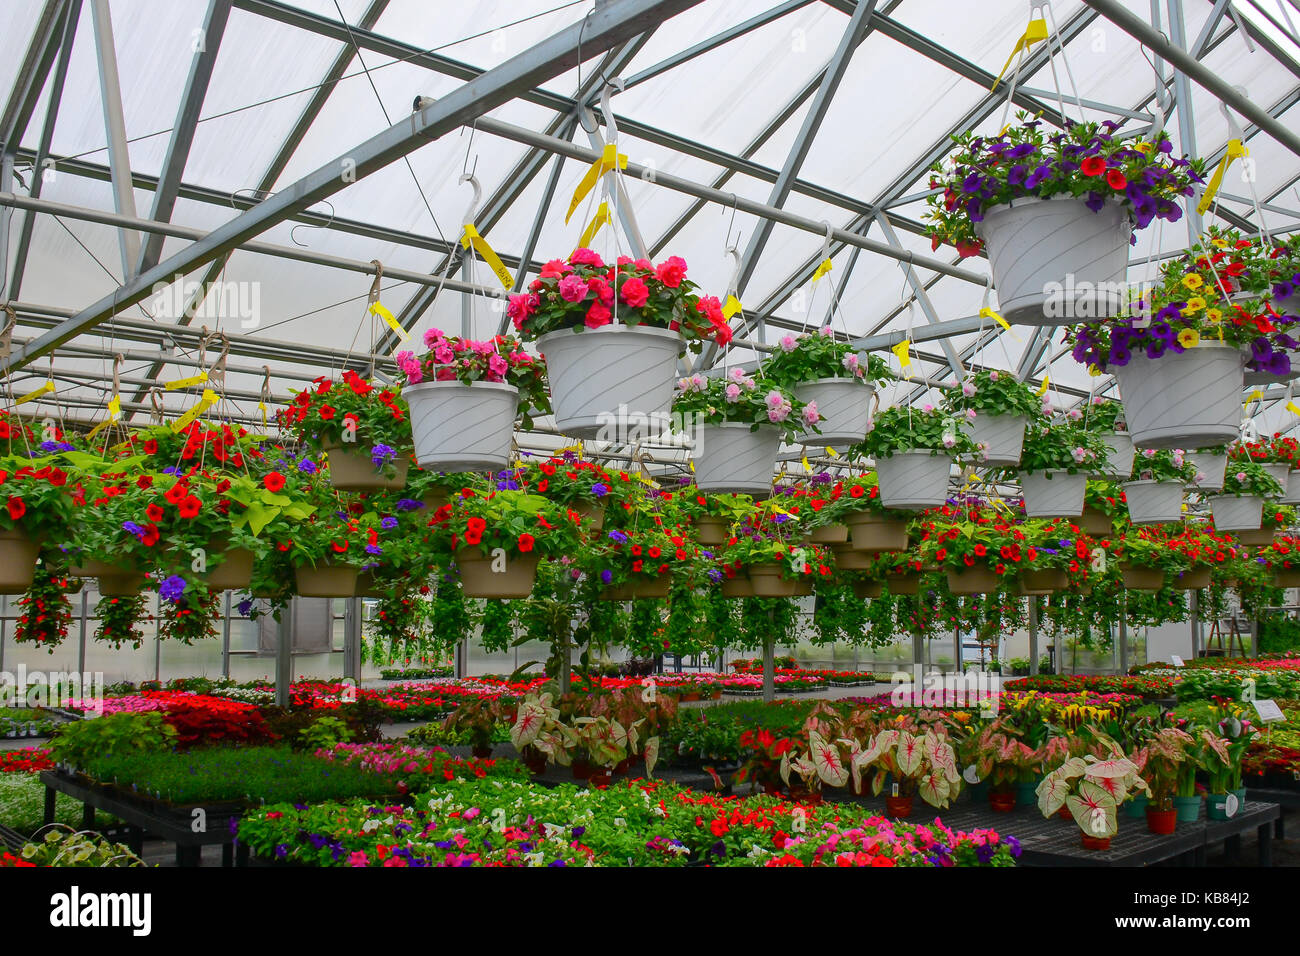 Hanging baskets and flats of annual flowers for sale in retail greenhouse. Stock Photo